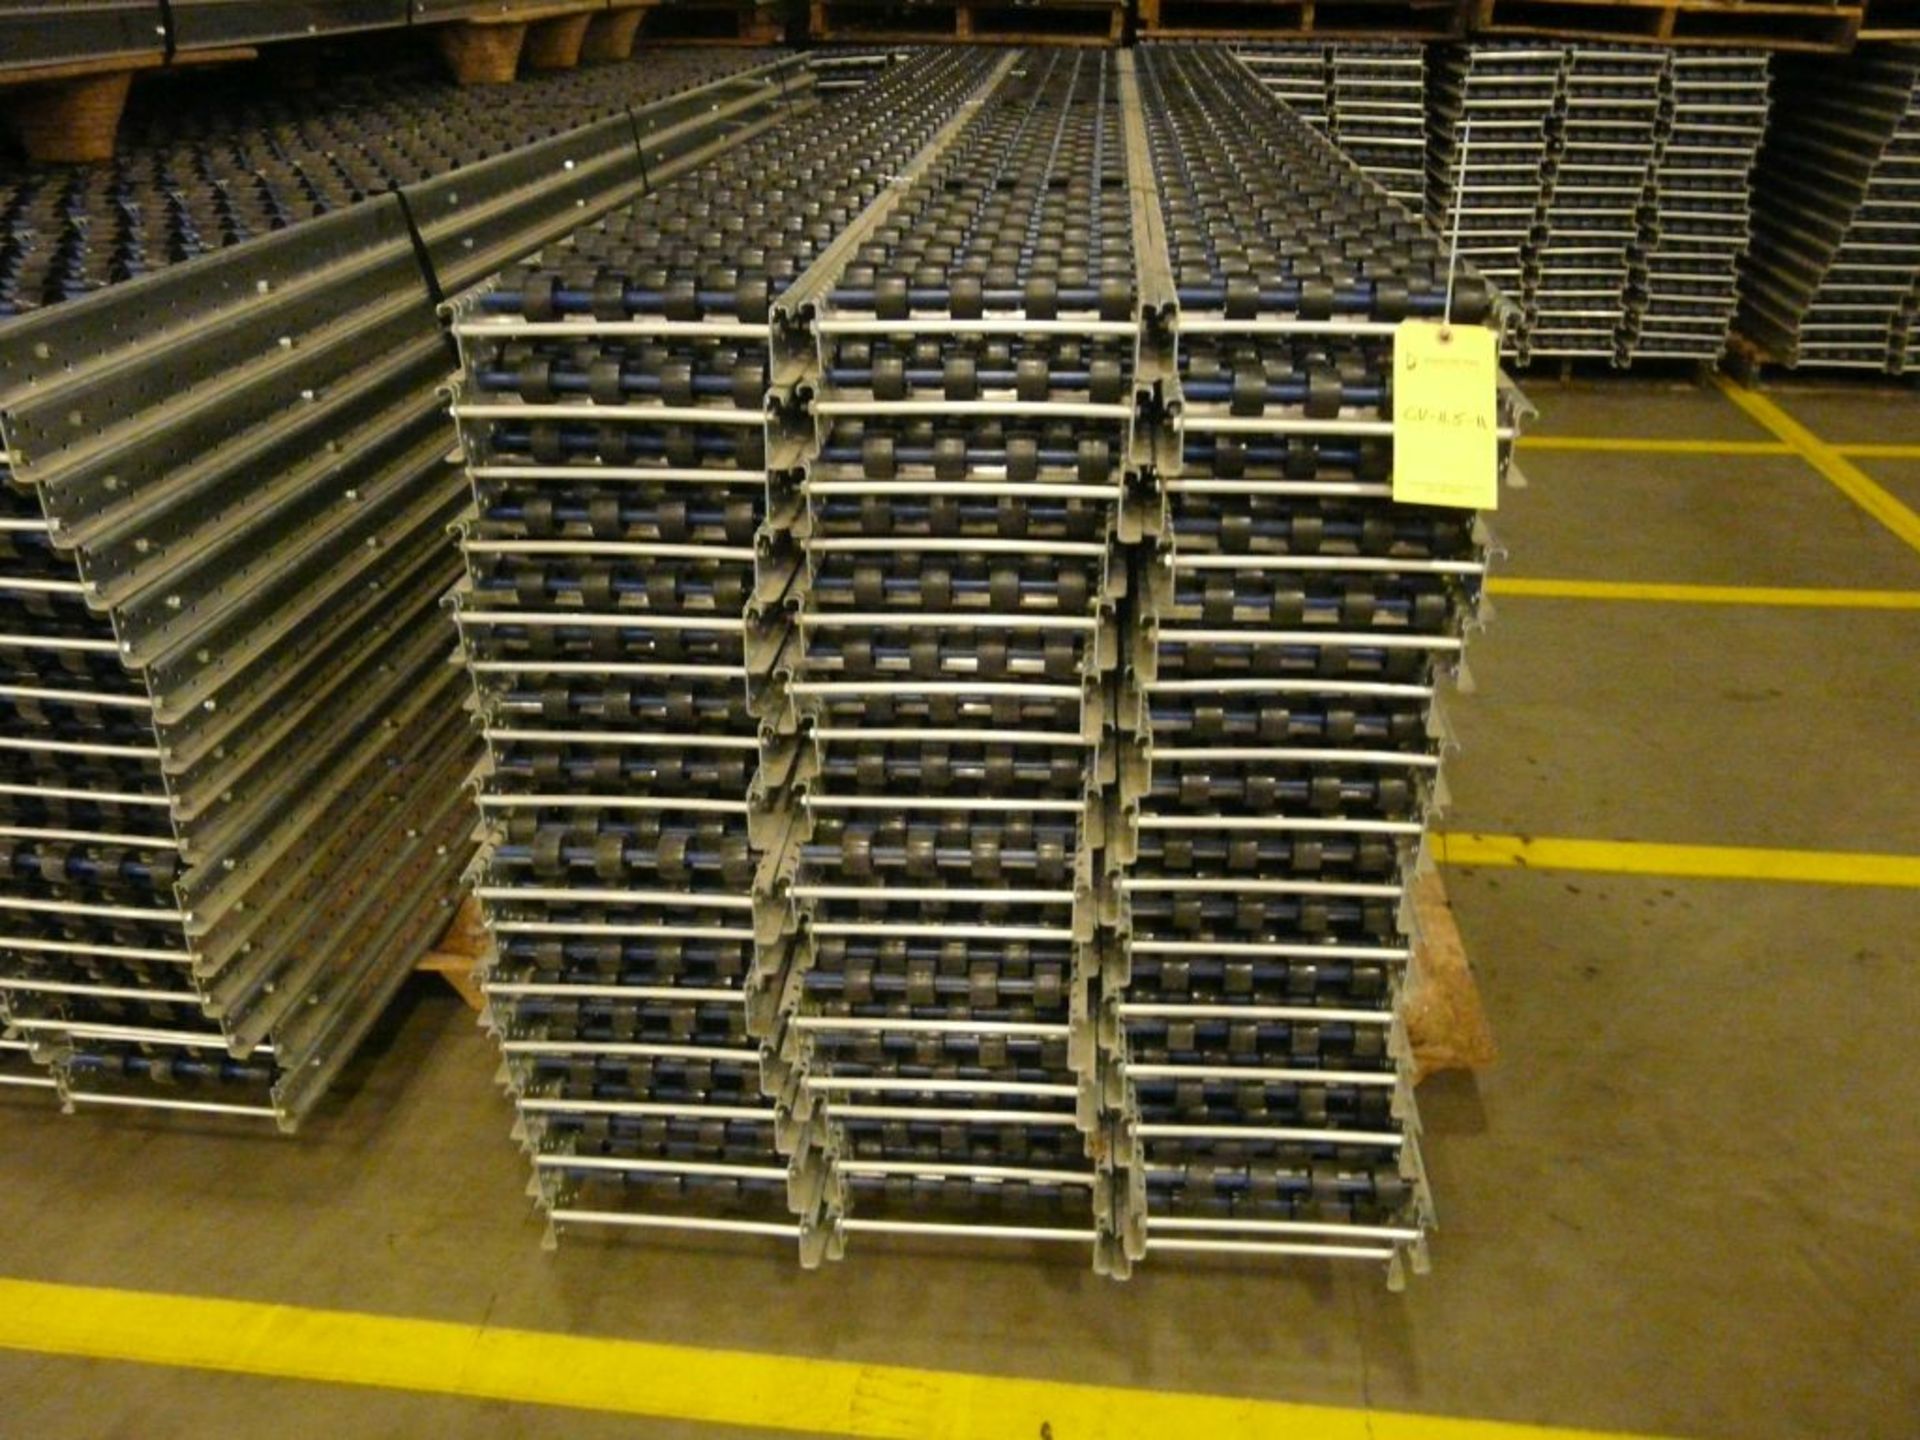 Lot of (90) SpanTrack Wheelbed Carton Flow Conveyors - 11.5'L x 11"W; Tag: 223629 - $30 Lot - Image 2 of 4